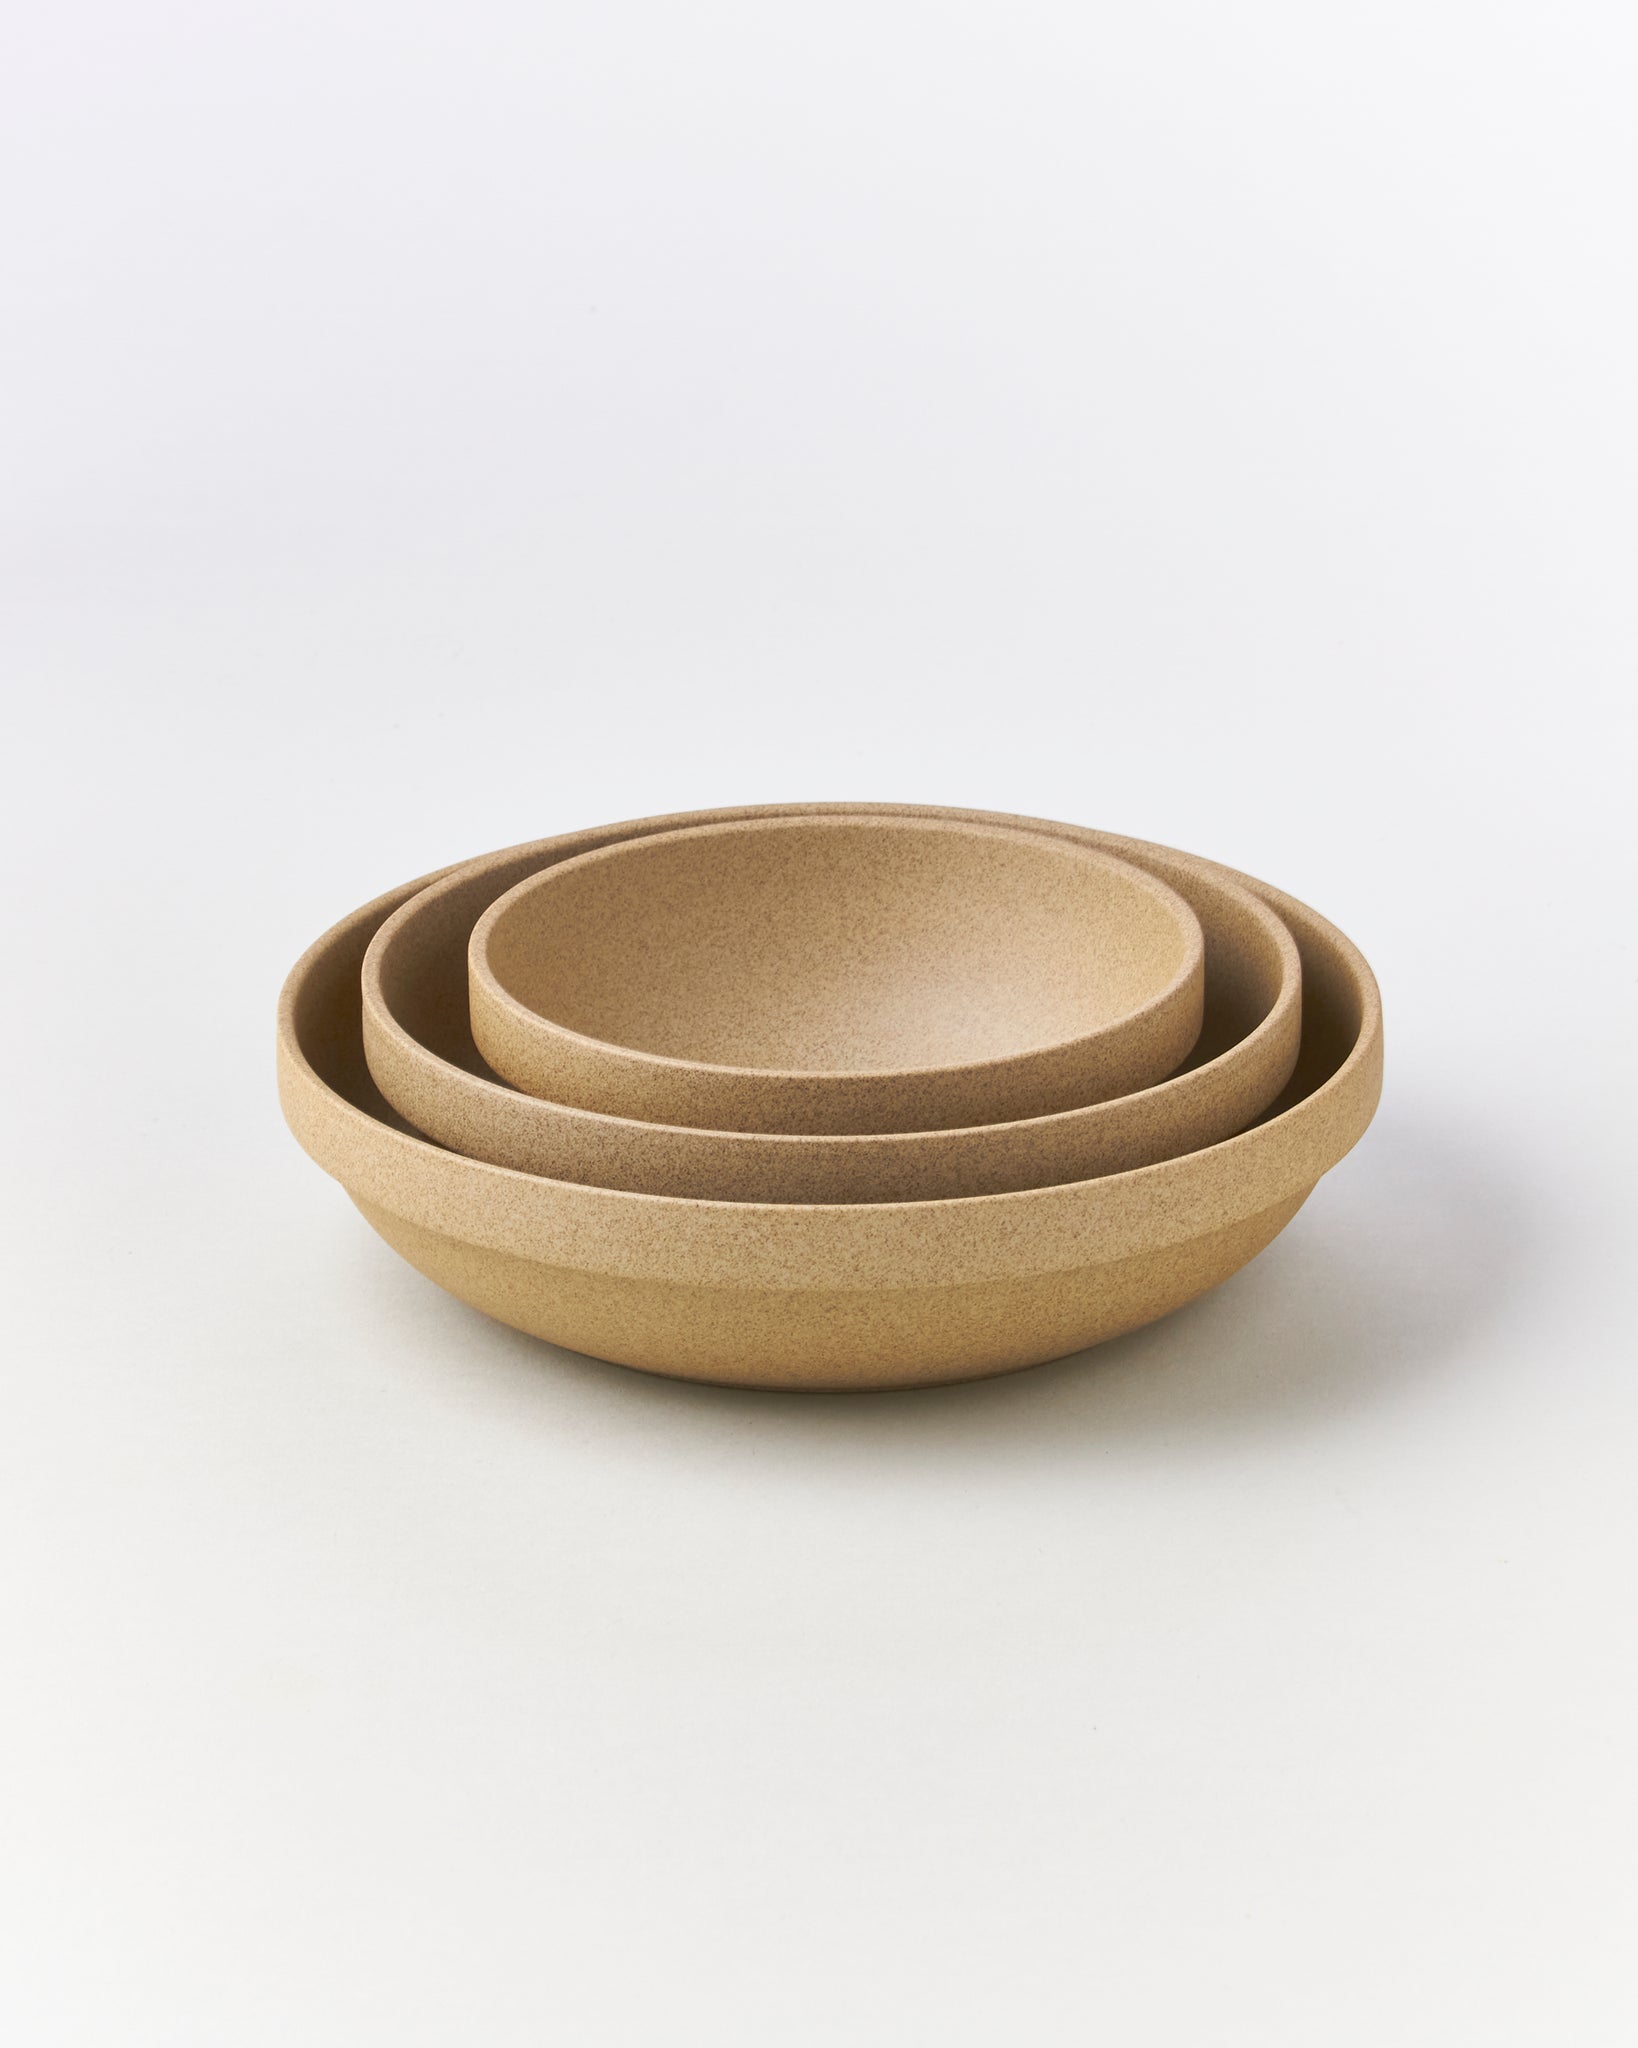 Hasami 8 5/8-inch Round Bowl in Natural